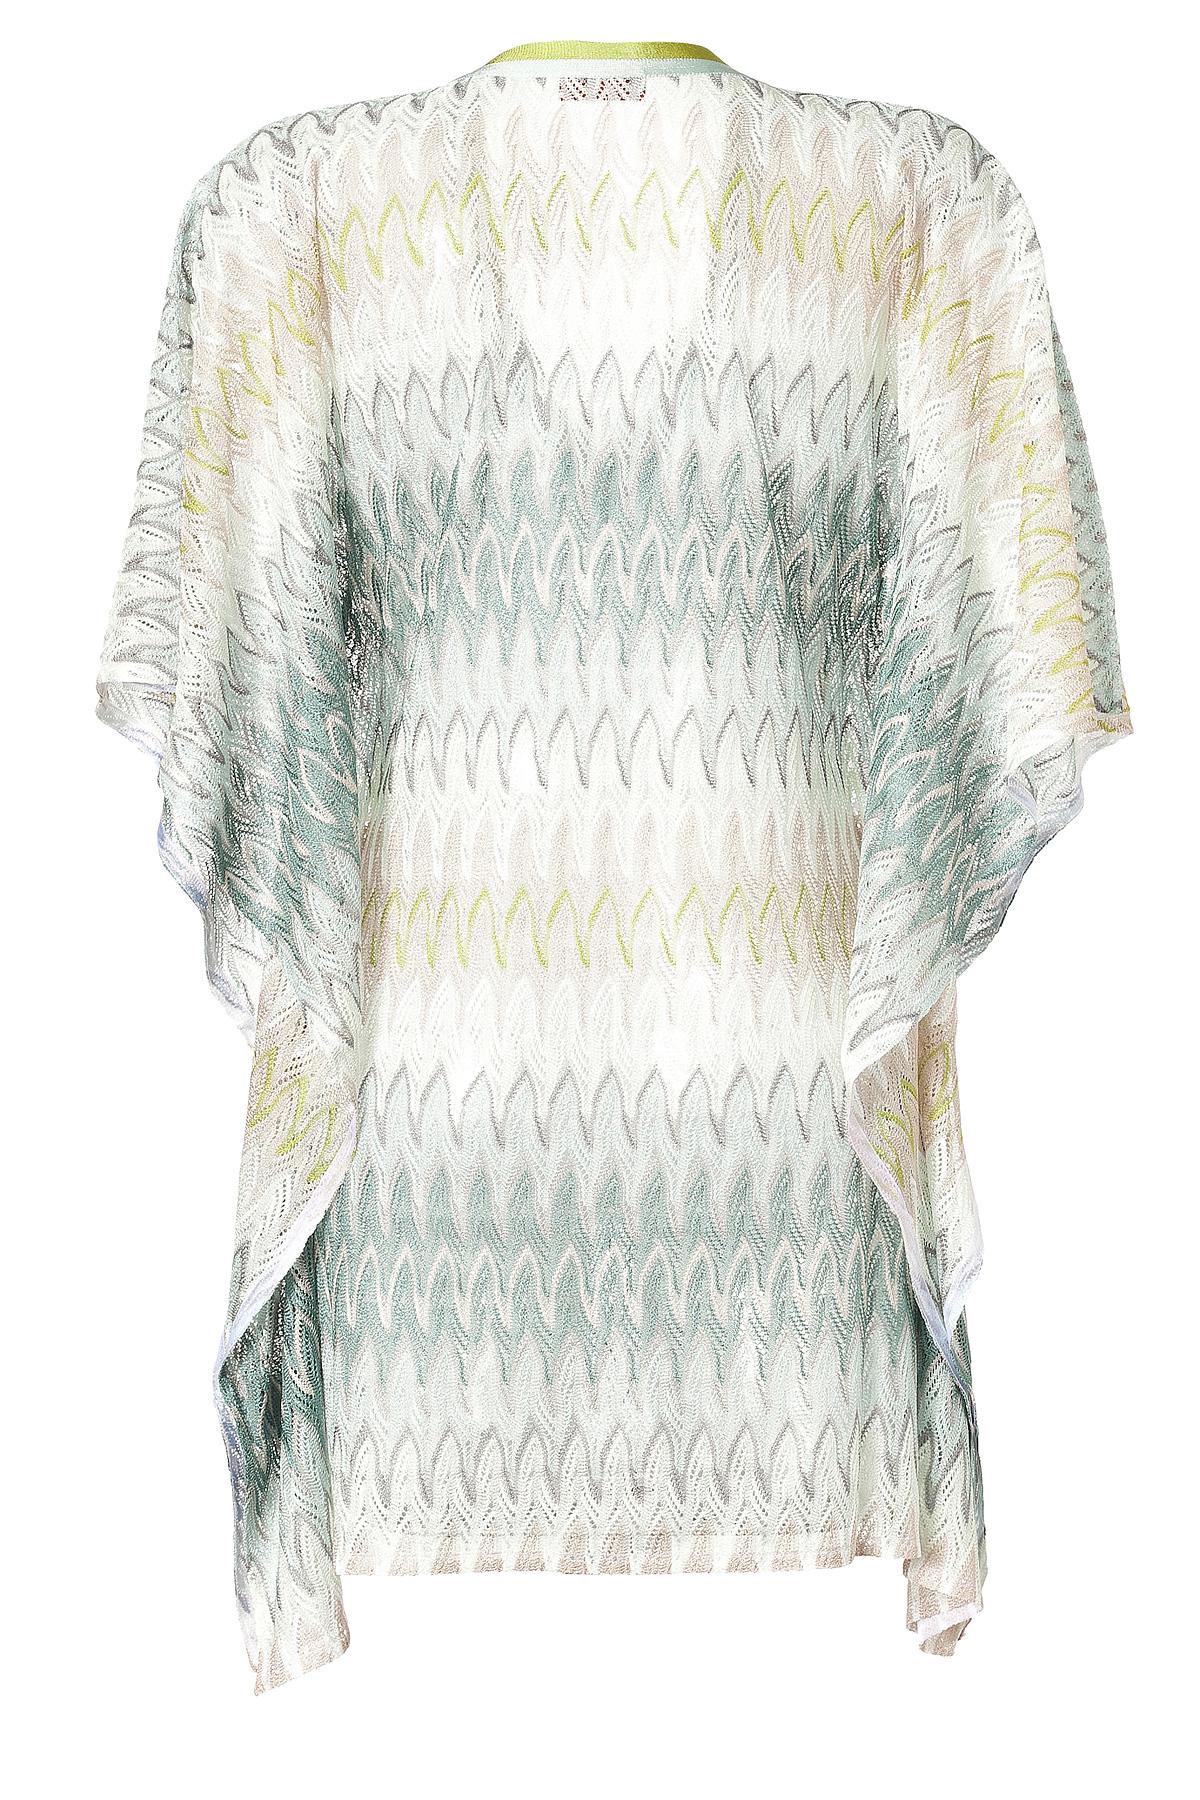 This Missoni kaftan is made from its signature crochet-knit in multiple shades - so will work with almost any bikini you slip it over. Perfect for your next vacation, it's crease-resistant and takes up next to no space when folded.

Sold out